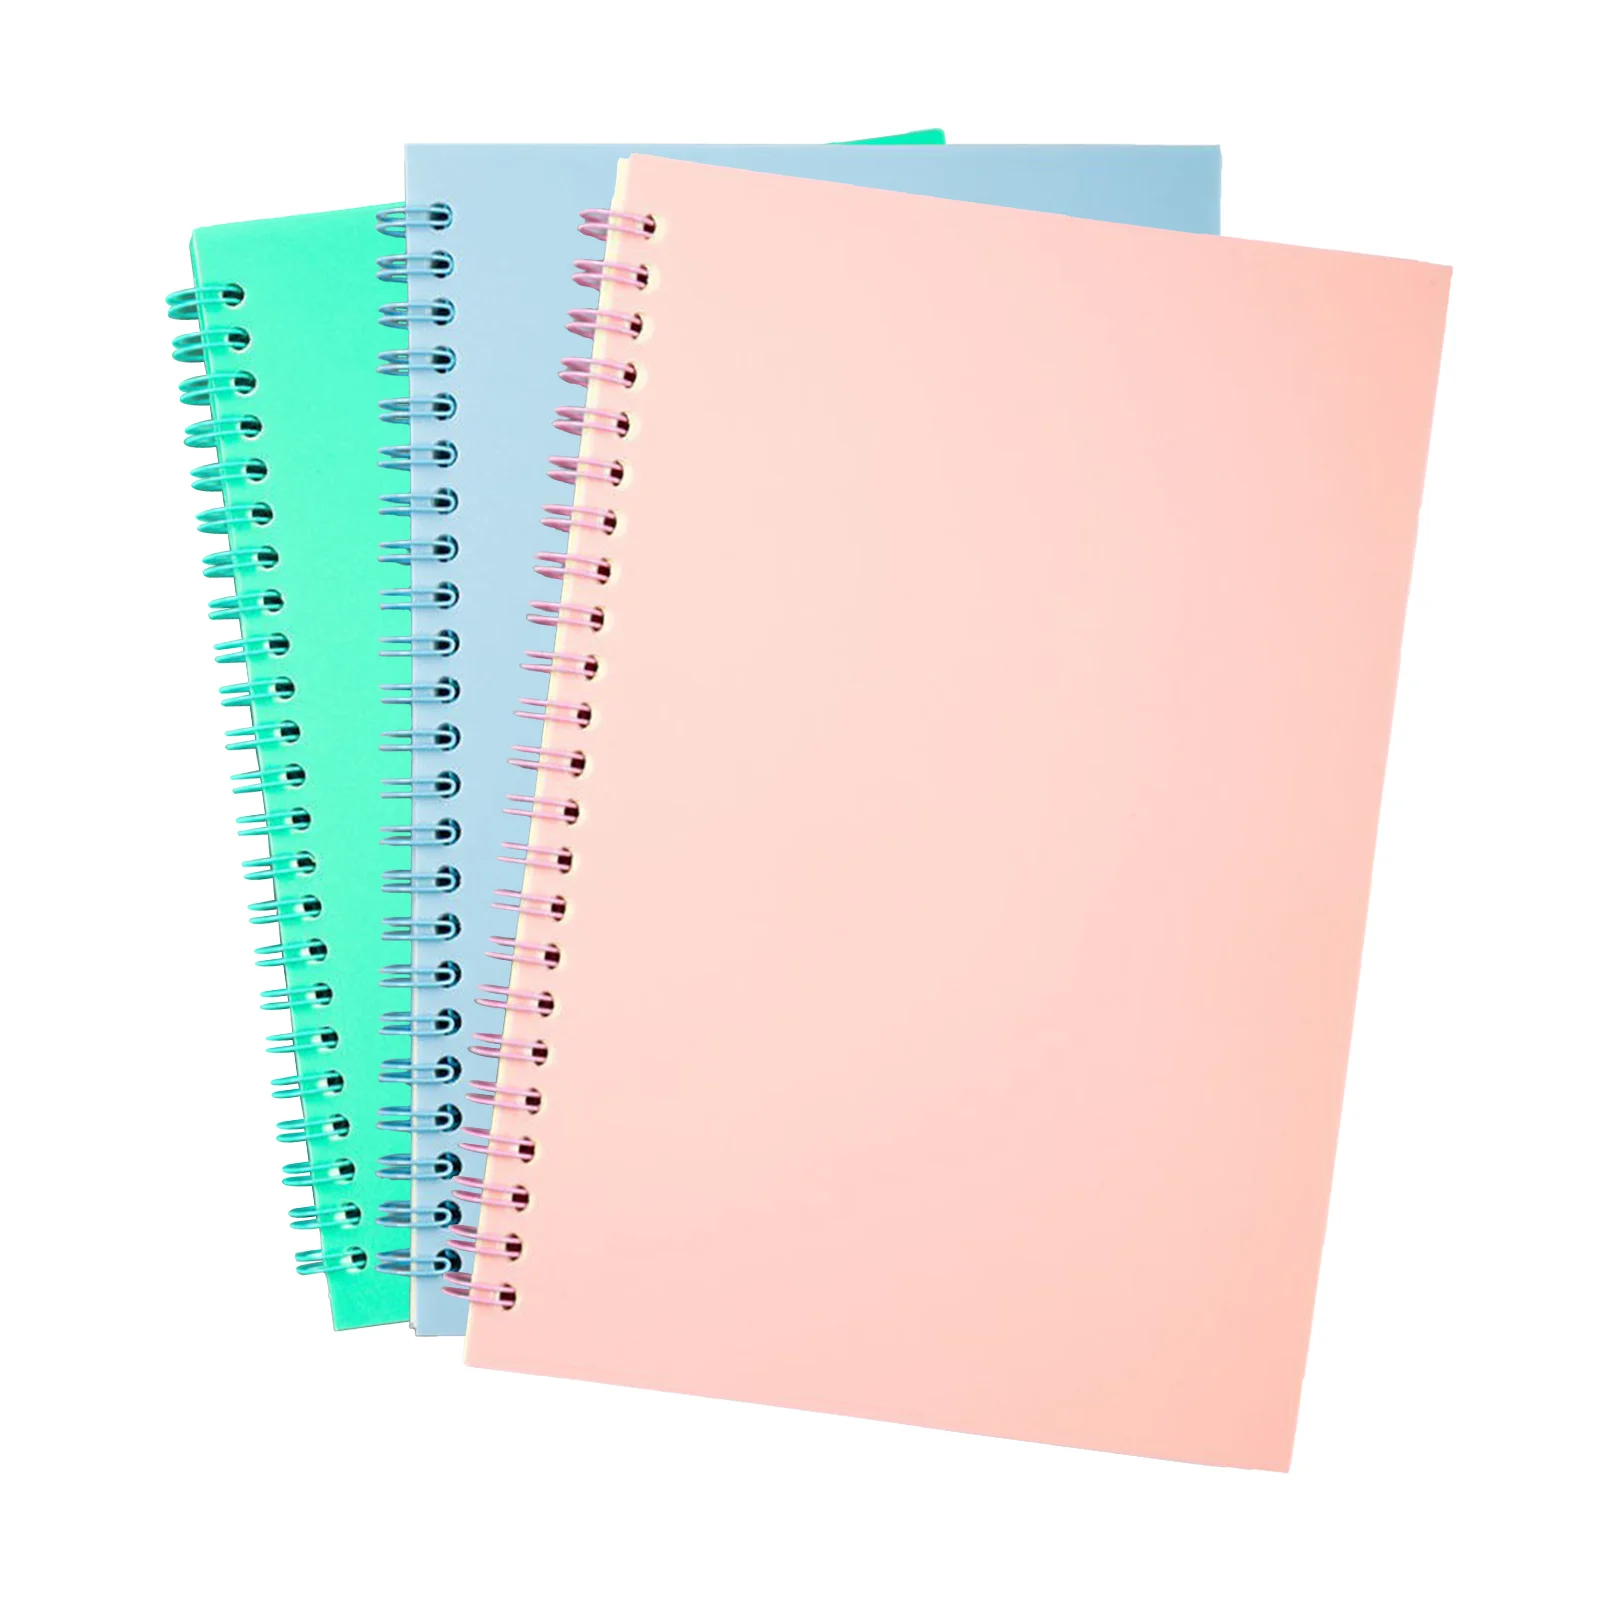 

3pcs A5 Planner Journals Thick Diary Hardcover For Study 8mm Ruled 80 Sheets 160 Pages Office Stationery Spiral Notebook Student